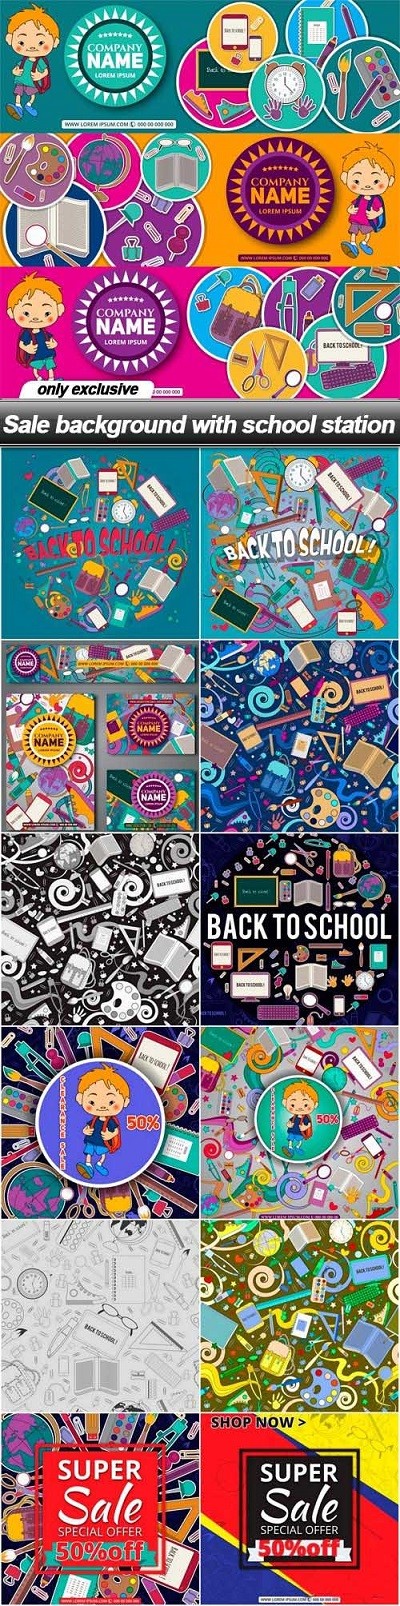 School Station with Sale background Vector